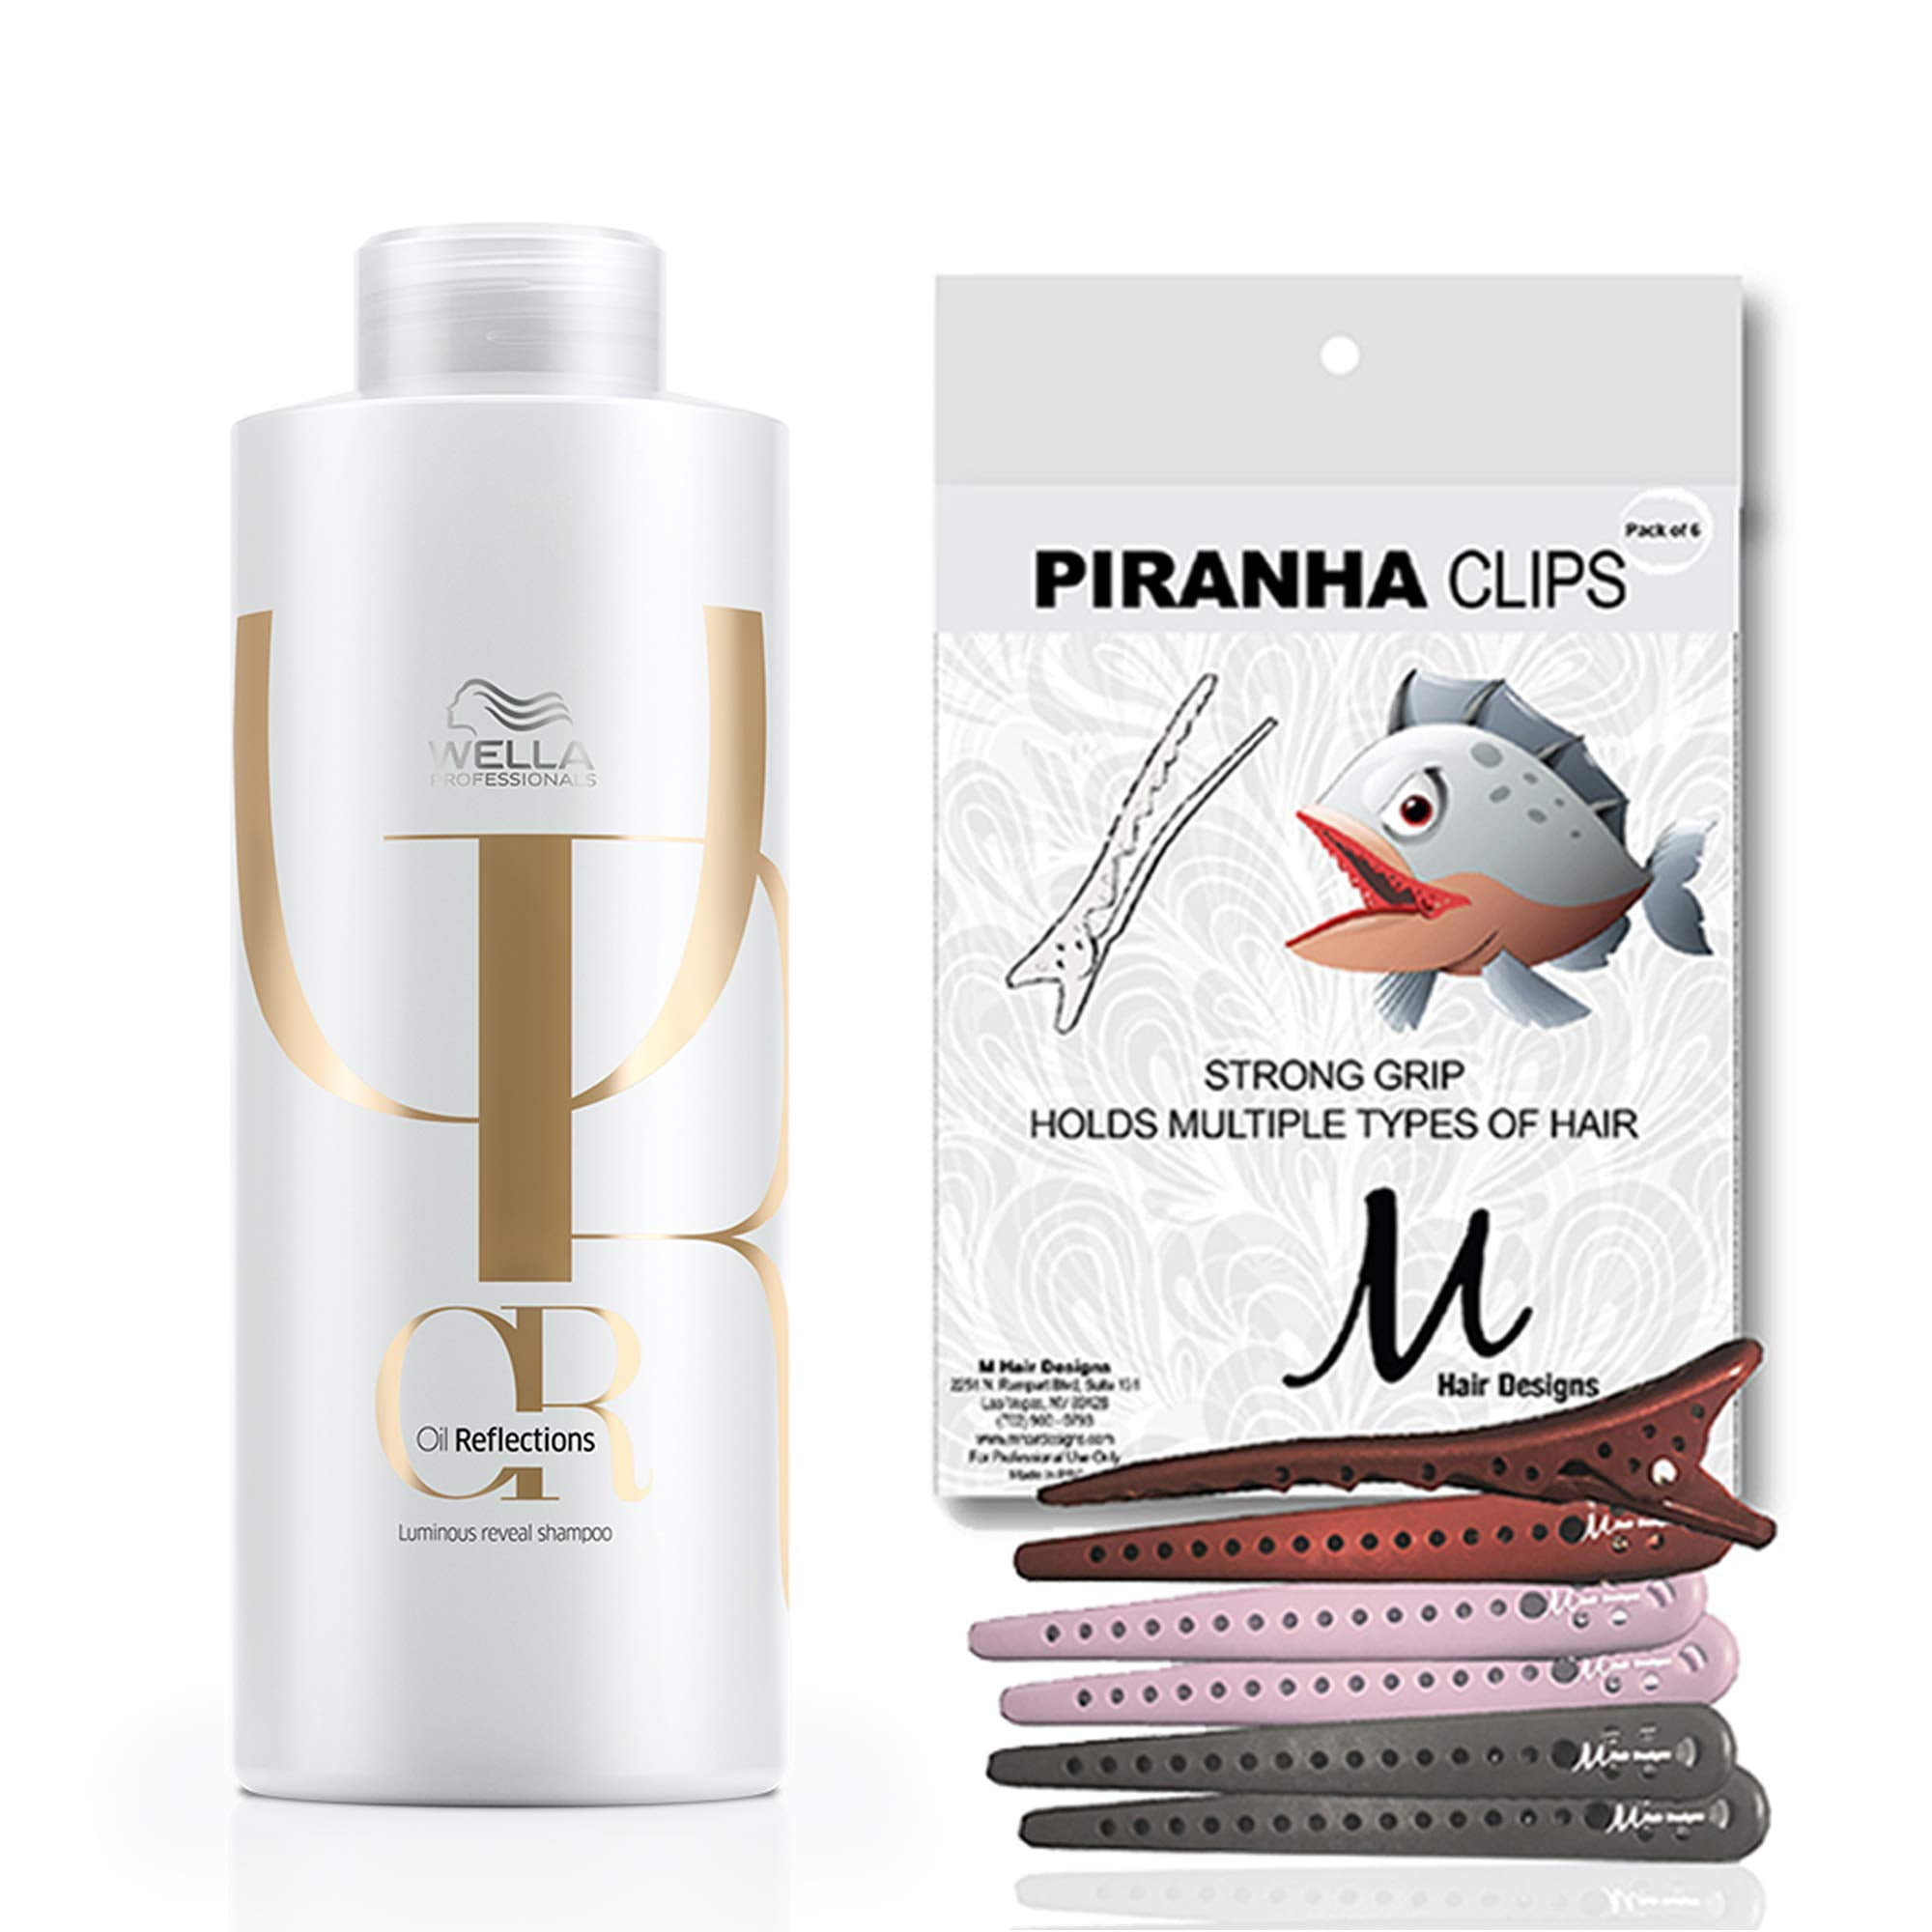 Wella Oil Reflections Luminous Reveal Shampoo For All Hair Types 1 Liter  and M Hair Designs Piranha Clips Assorted (Bundle - 2 items) 